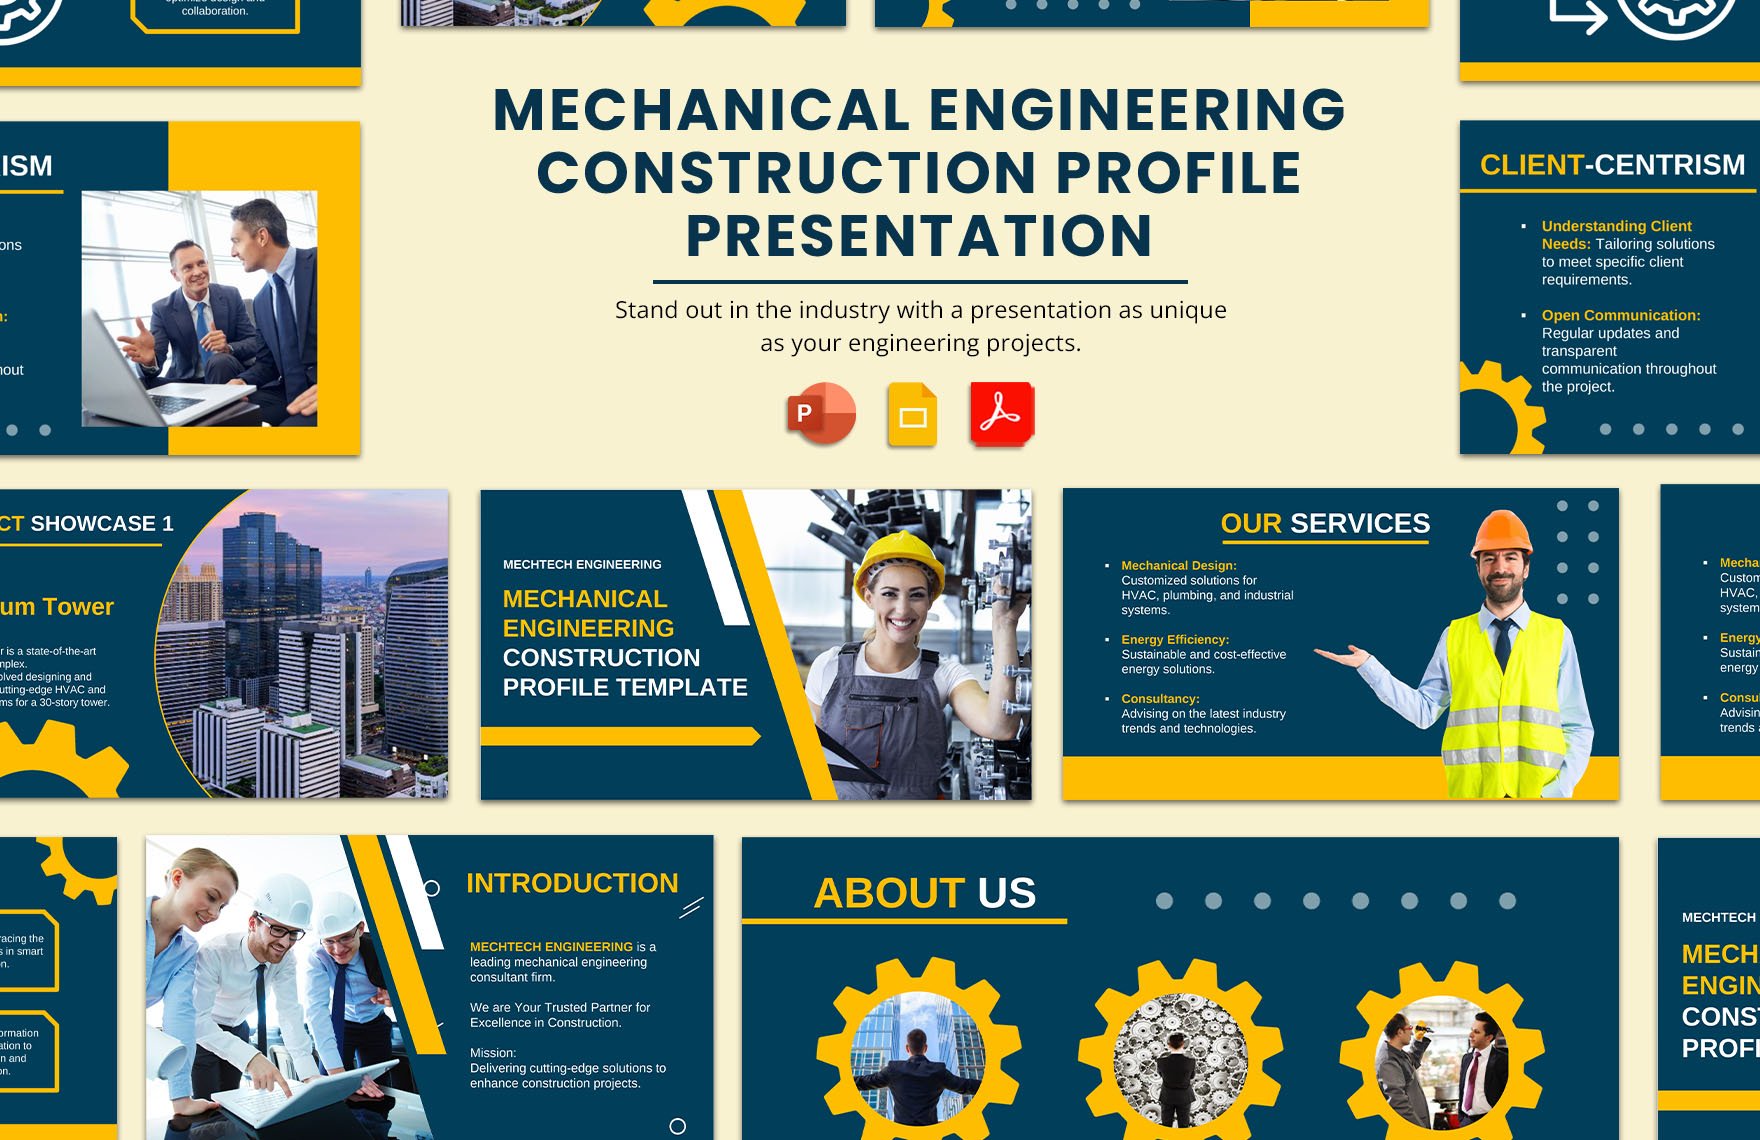 Mechanical Engineering Construction Profile Template